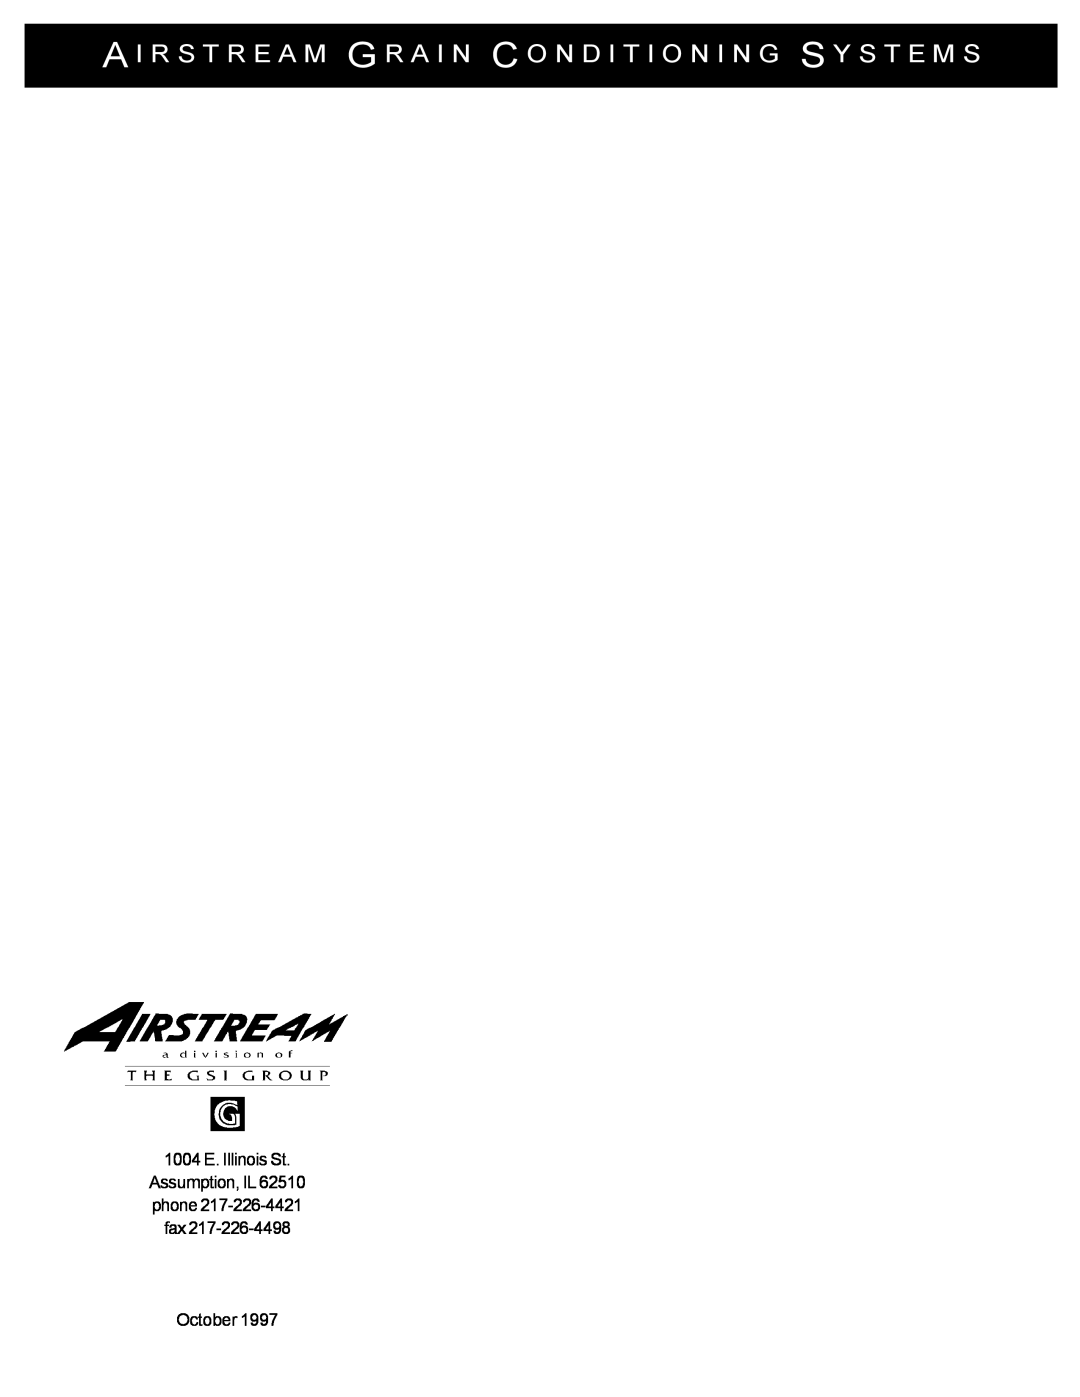 Airstream 18 owner manual 1004 E. Illinois St Assumption, IL phone fax, October 